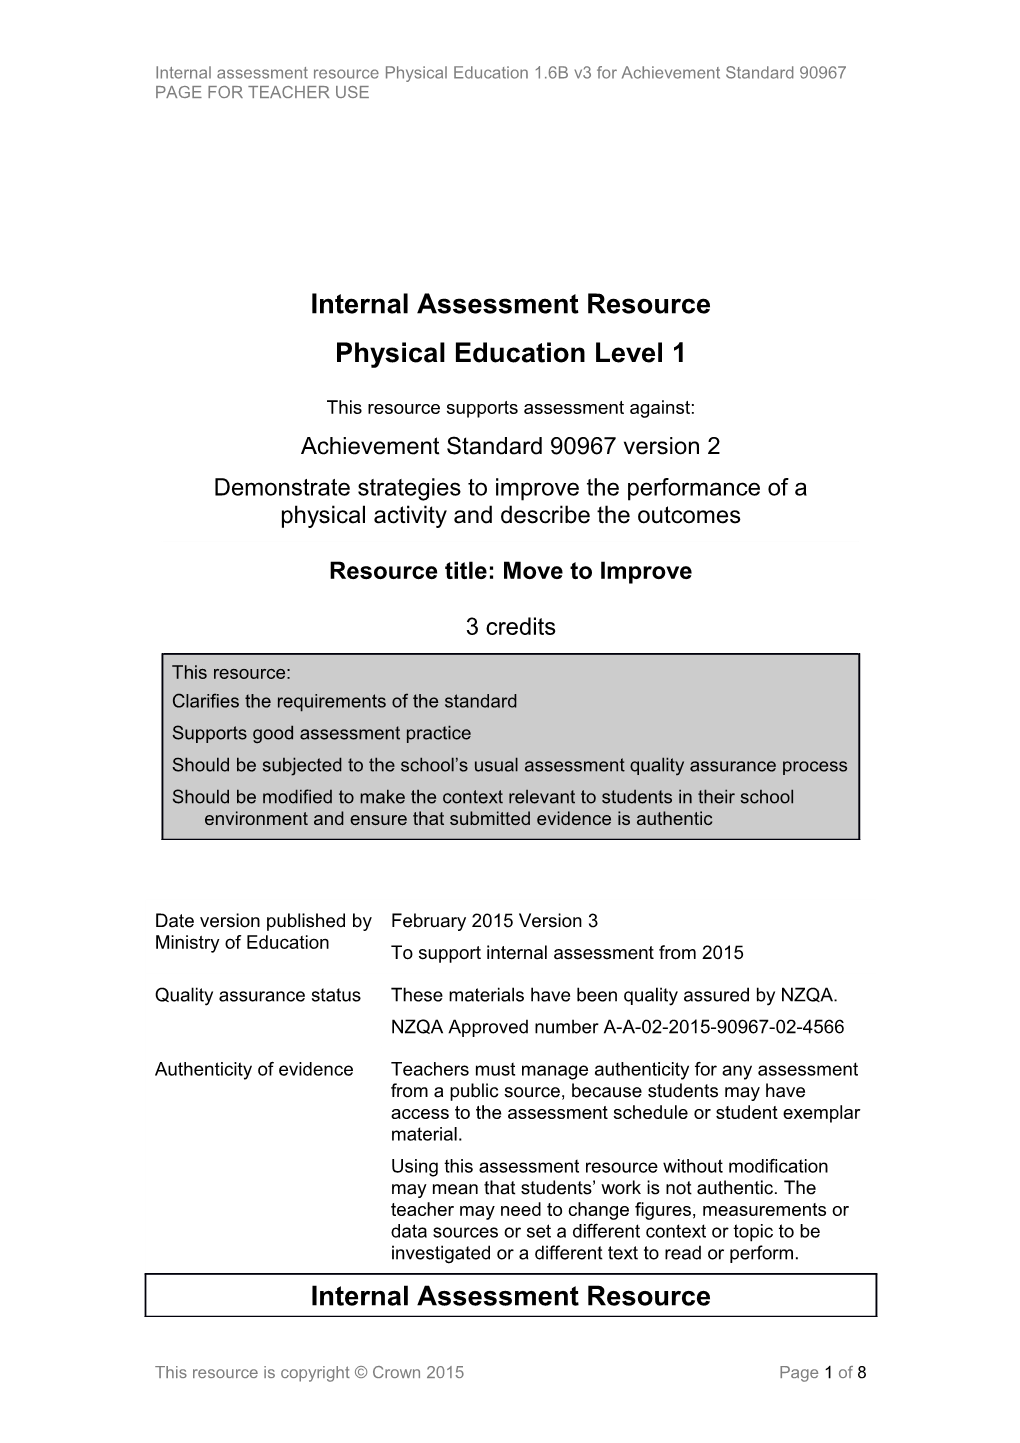 Level 1 Physical Education Internal Assessment Resource